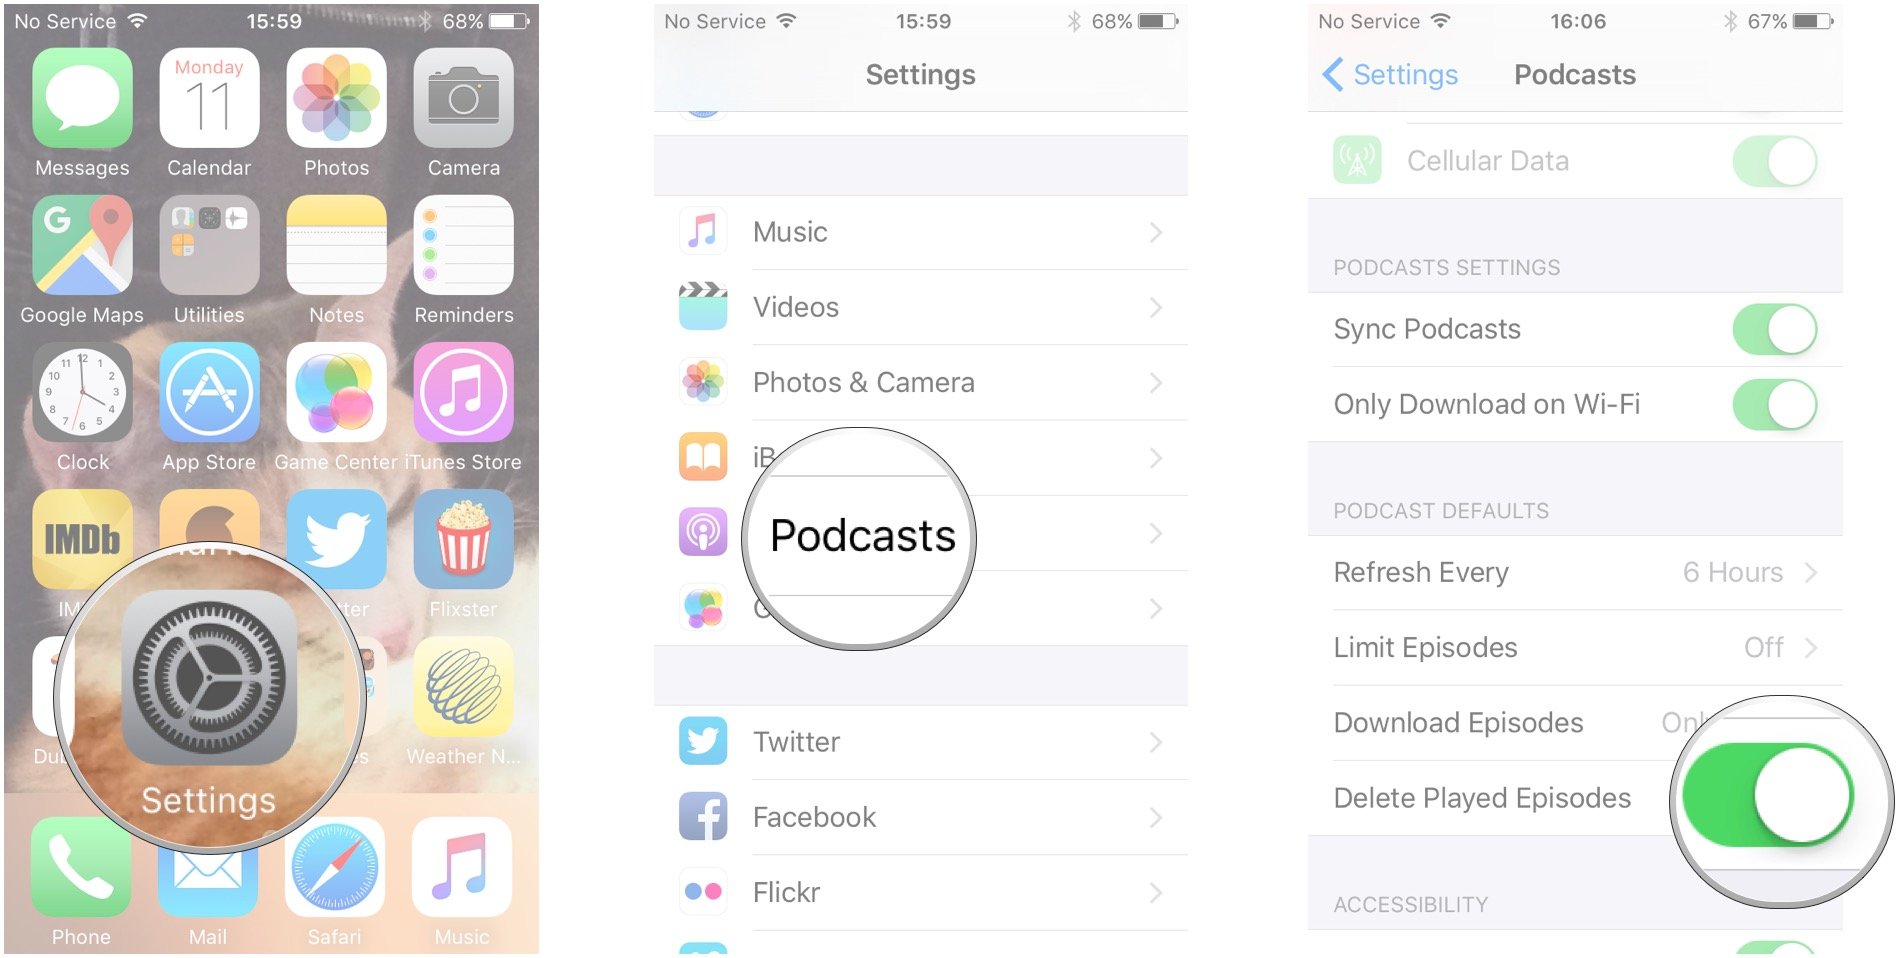 Launch the Settings app, tap Podcasts, tap the switch next to Delete Played Episodes to turn it off